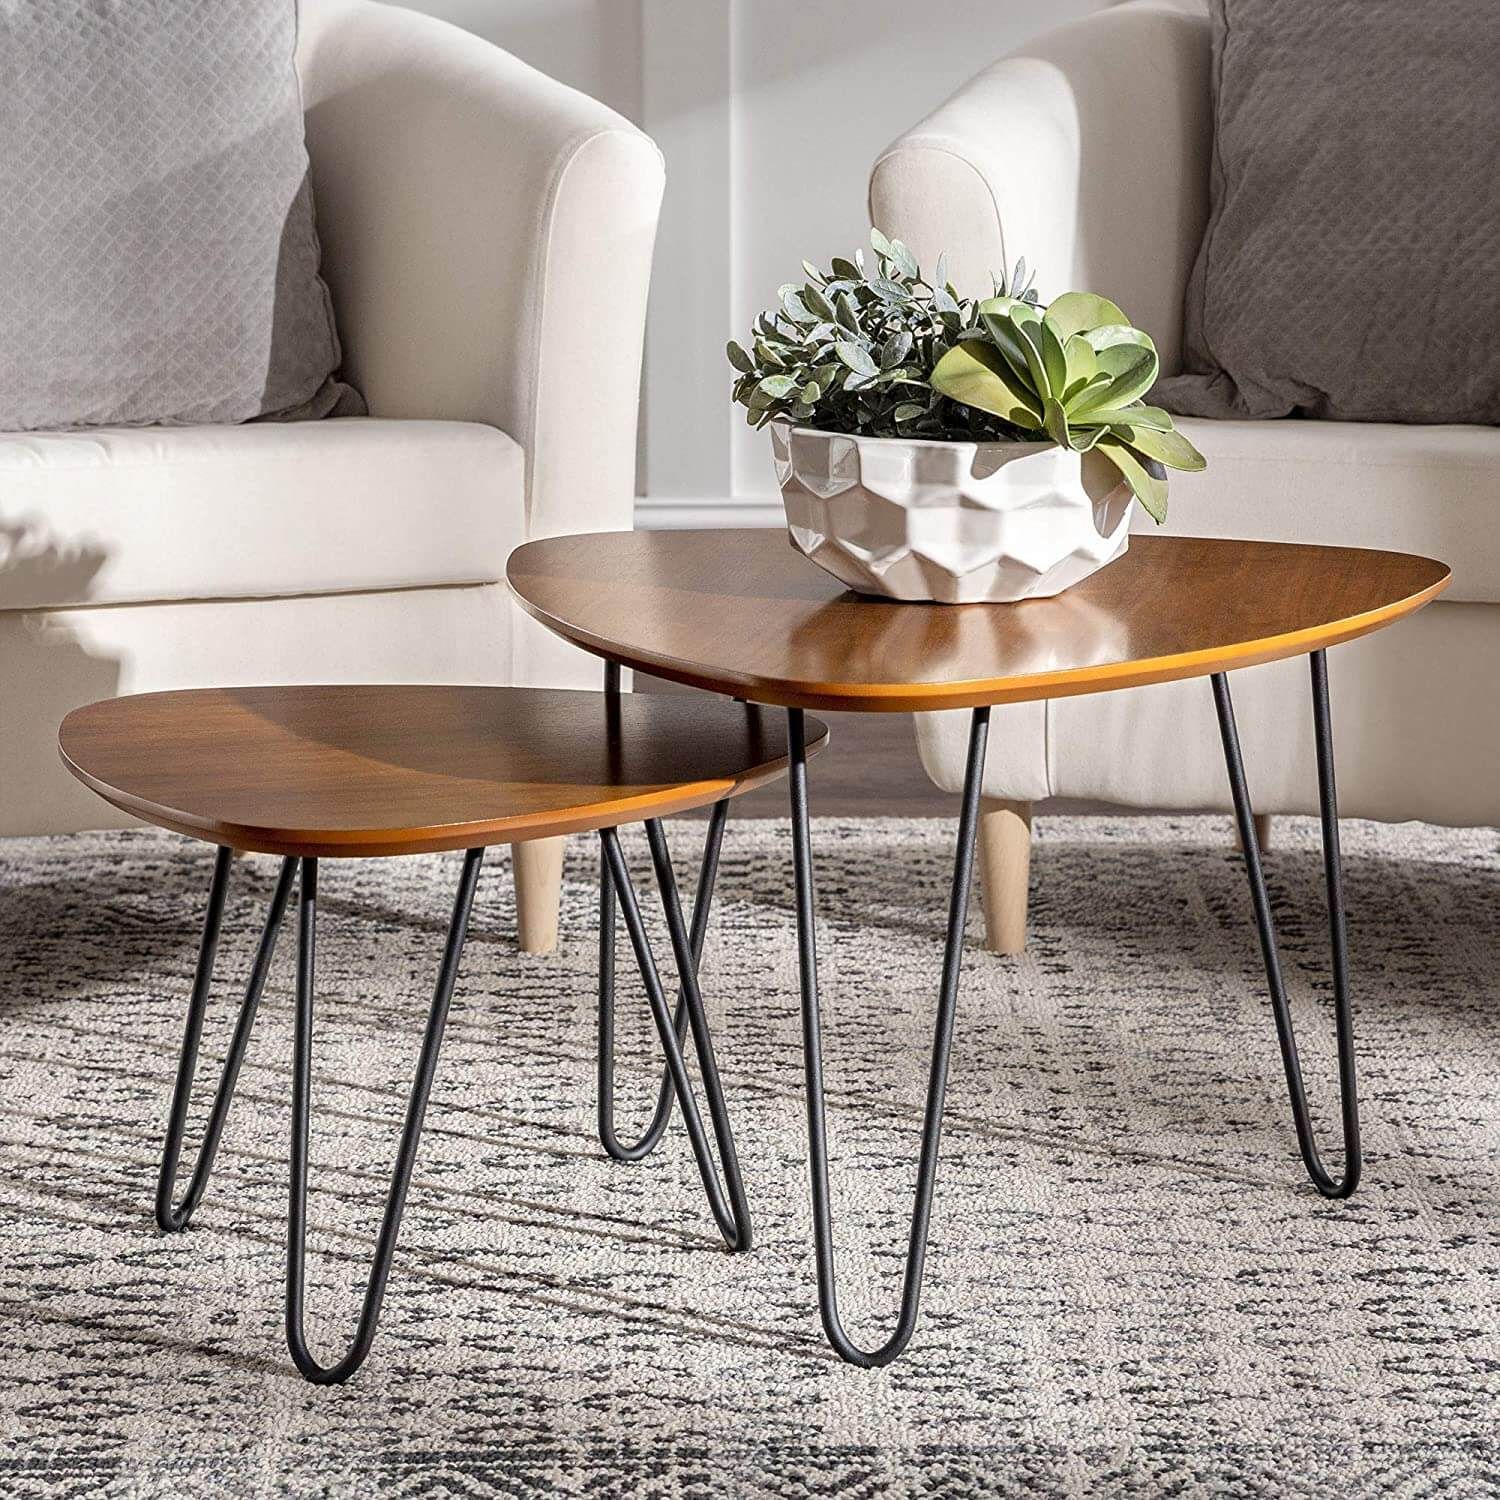 Choosing The Perfect Mid Century Modern Coffee Table – Oceanone Interiors With Regard To Mid Century Modern Coffee Tables (View 15 of 15)